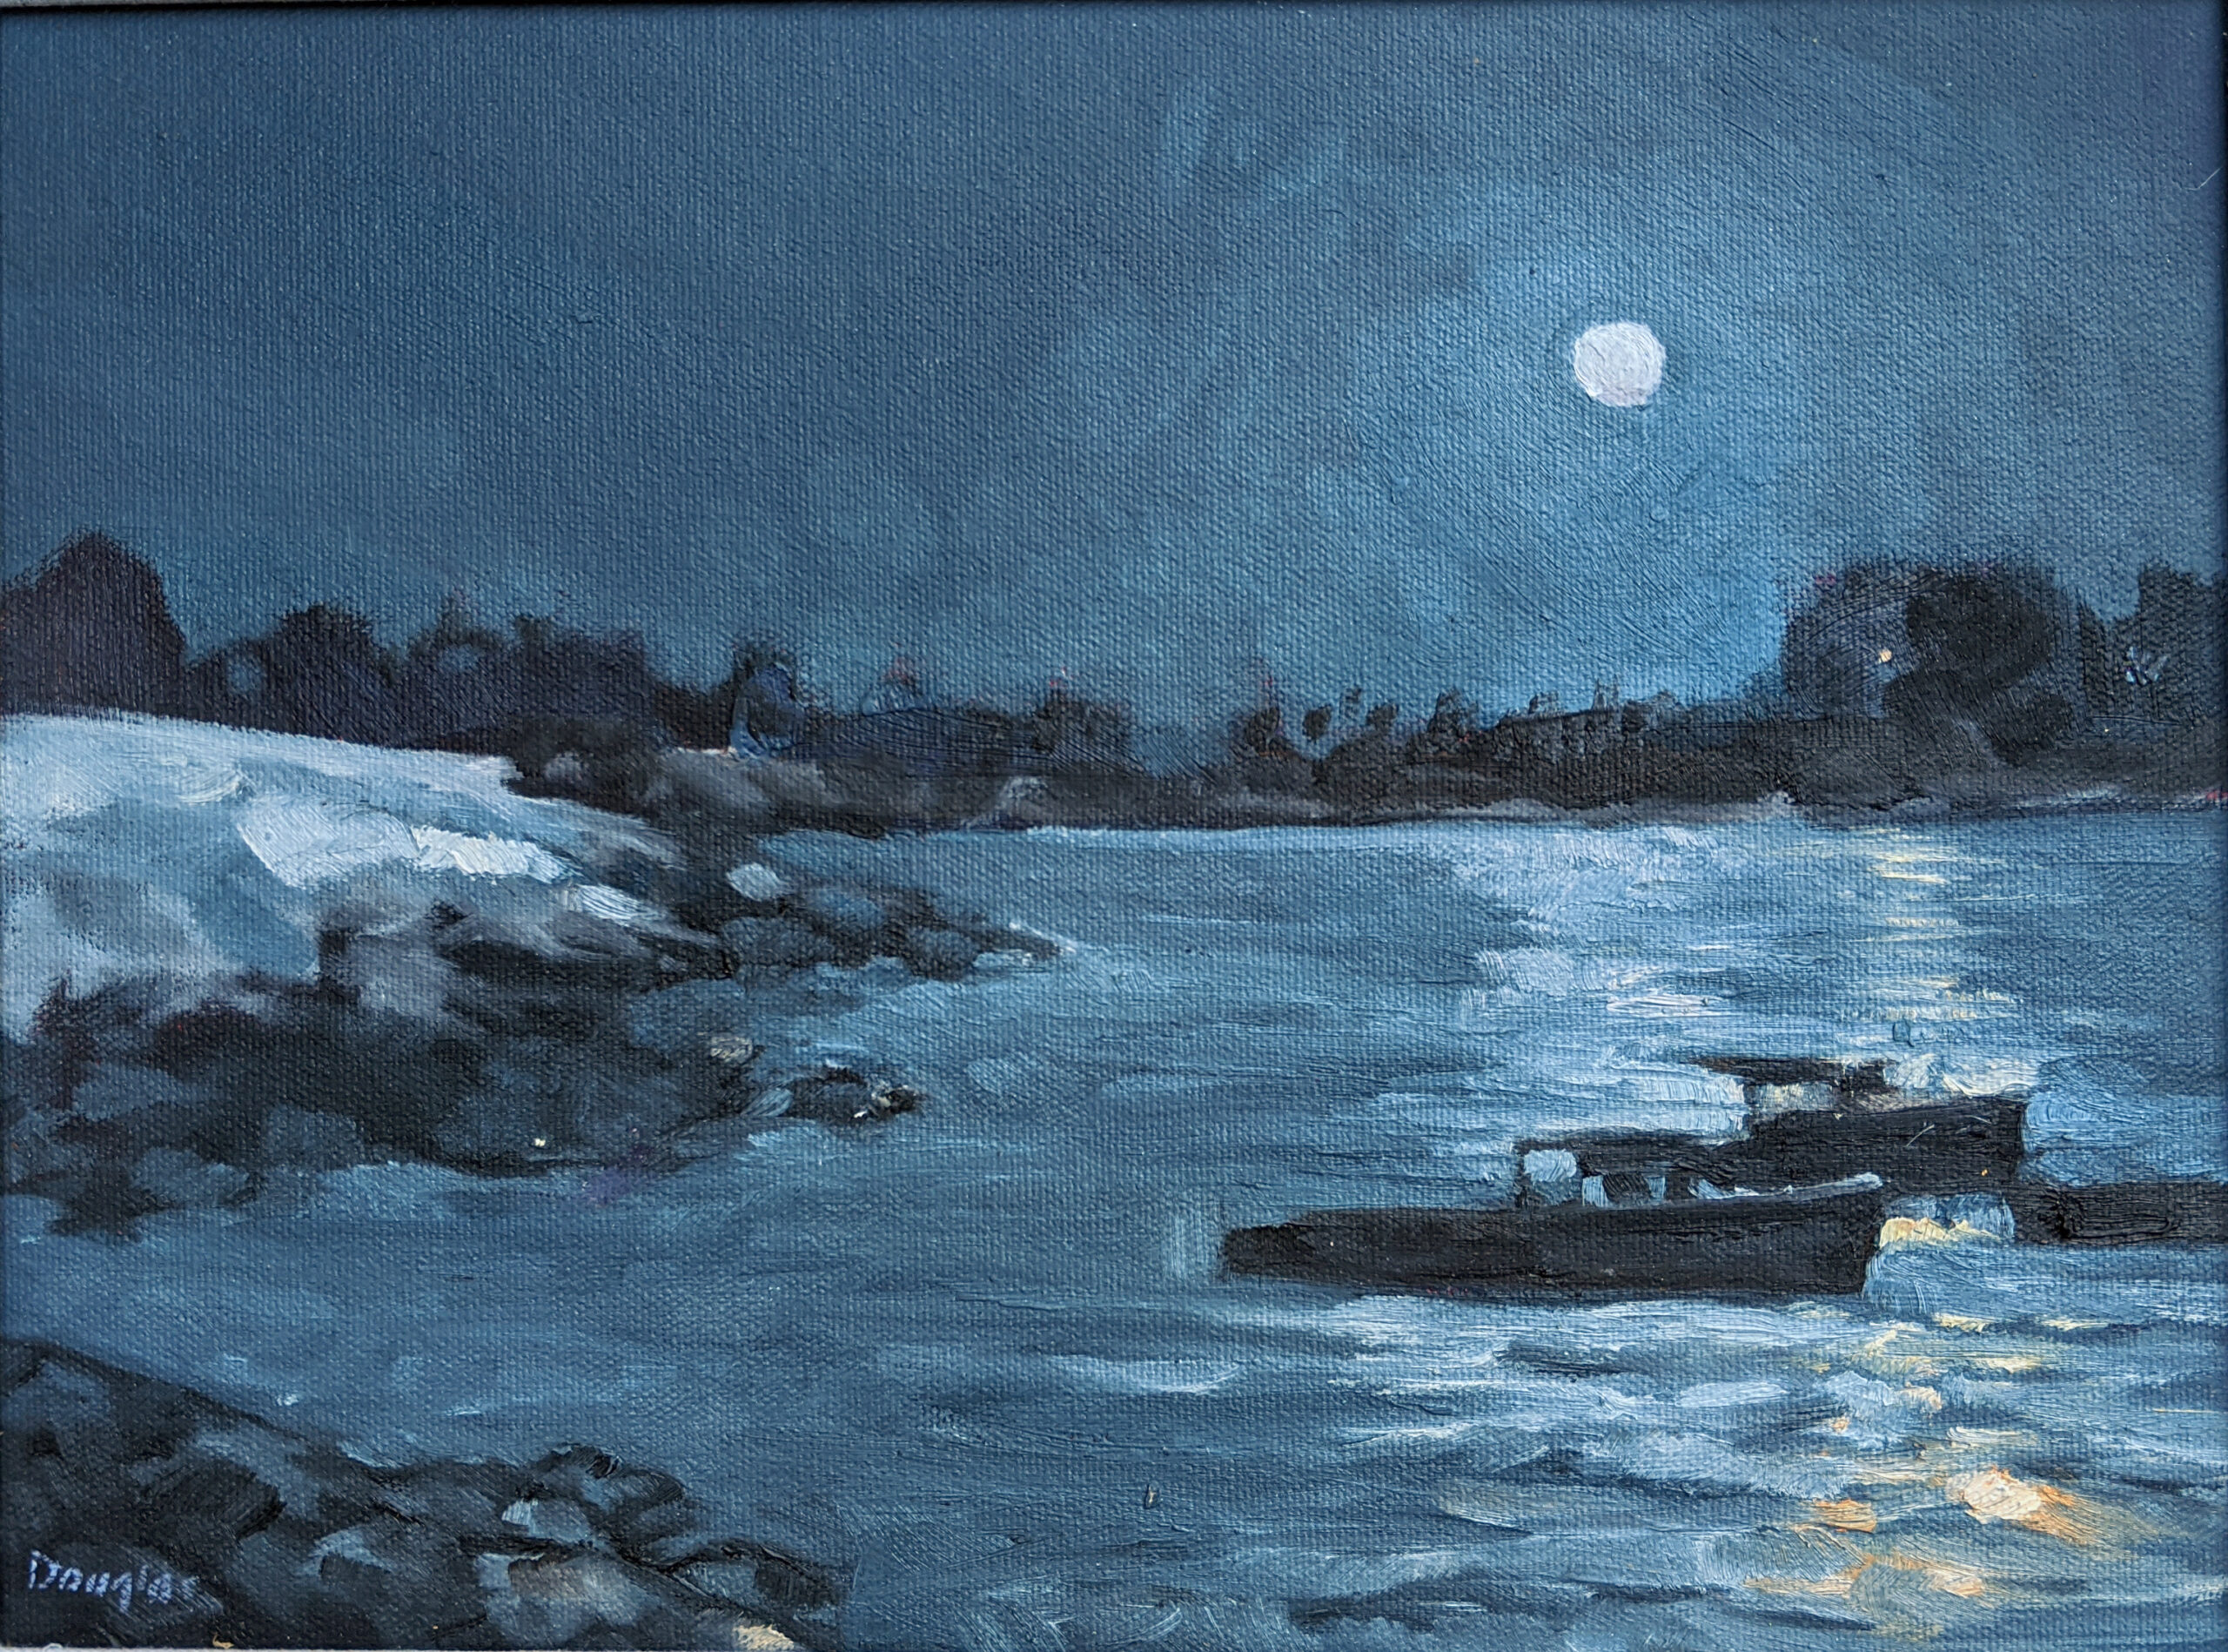 Nocturne on Clam Cove, 9X12, oil on archival canvasboard, $869.00 framed includes shipping in continental US.